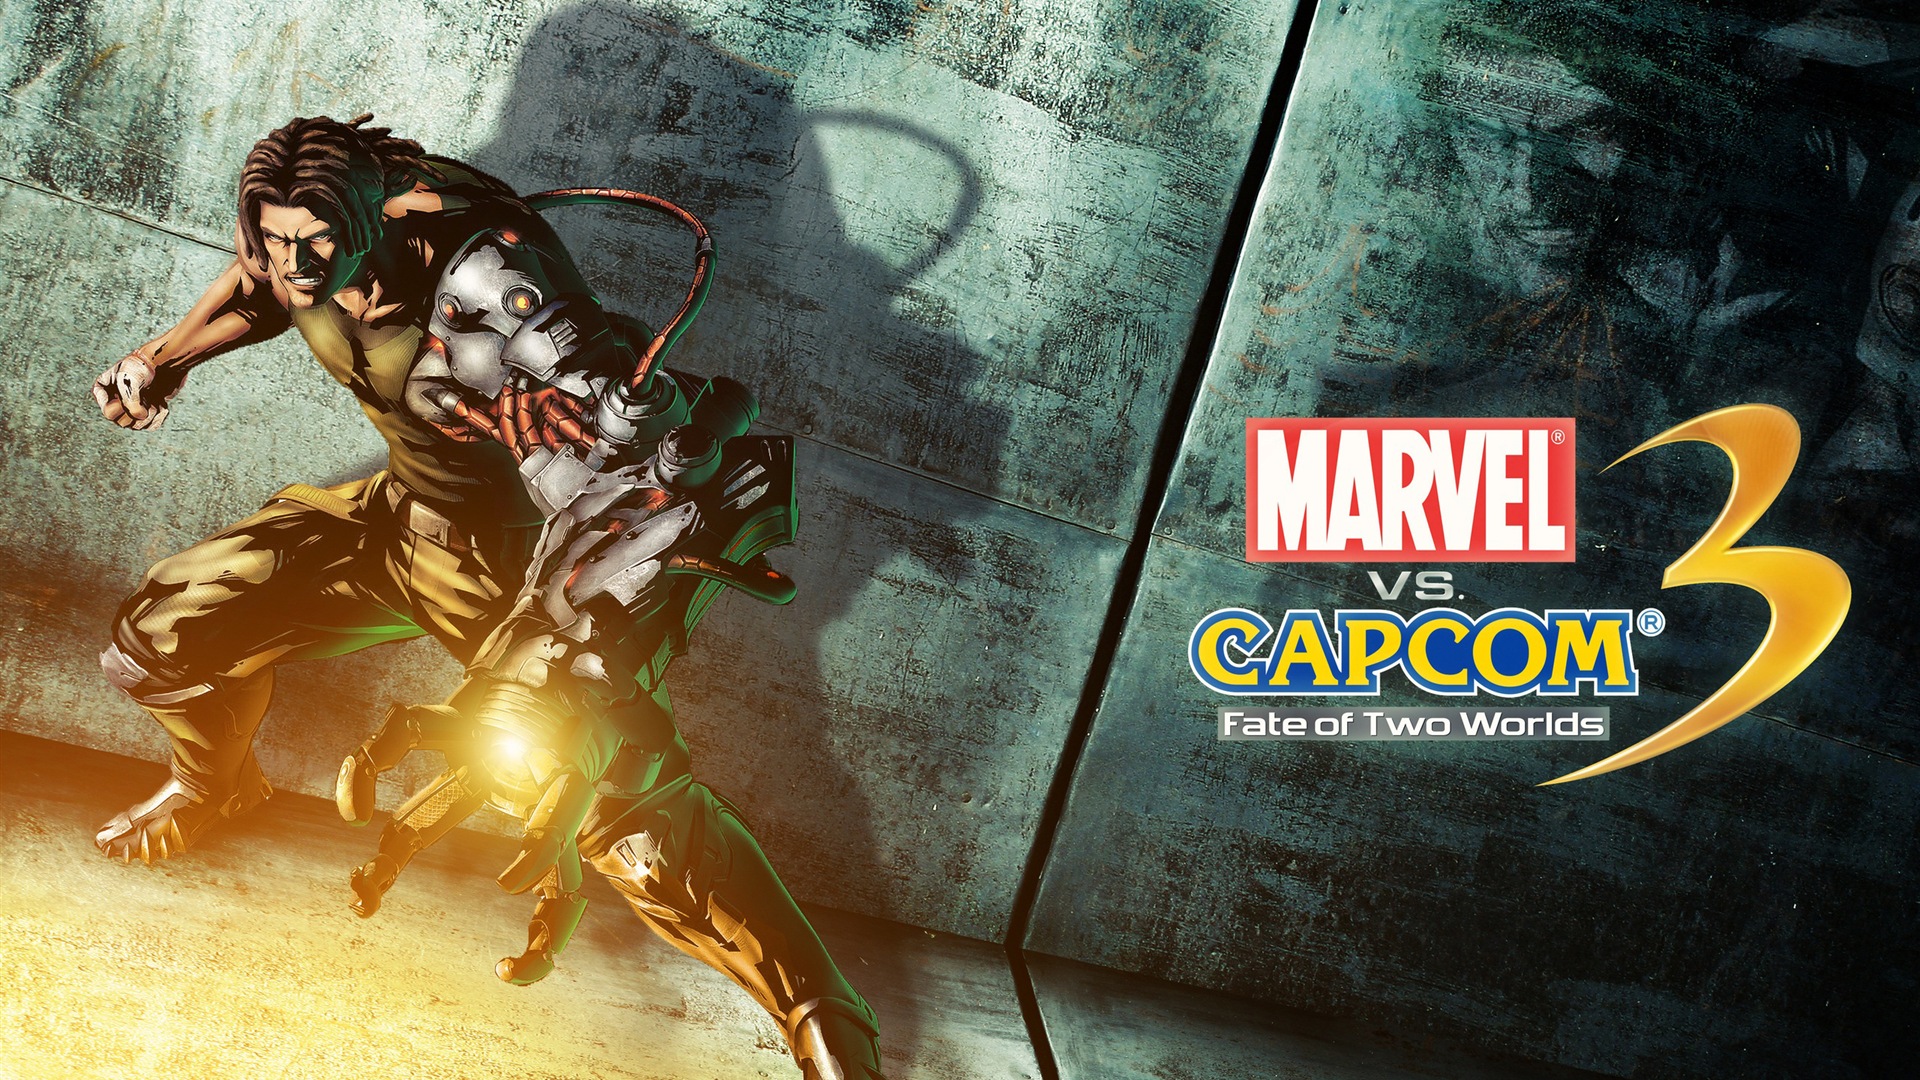 Marvel VS. Capcom 3: Fate of Two Worlds HD game wallpapers #8 - 1920x1080